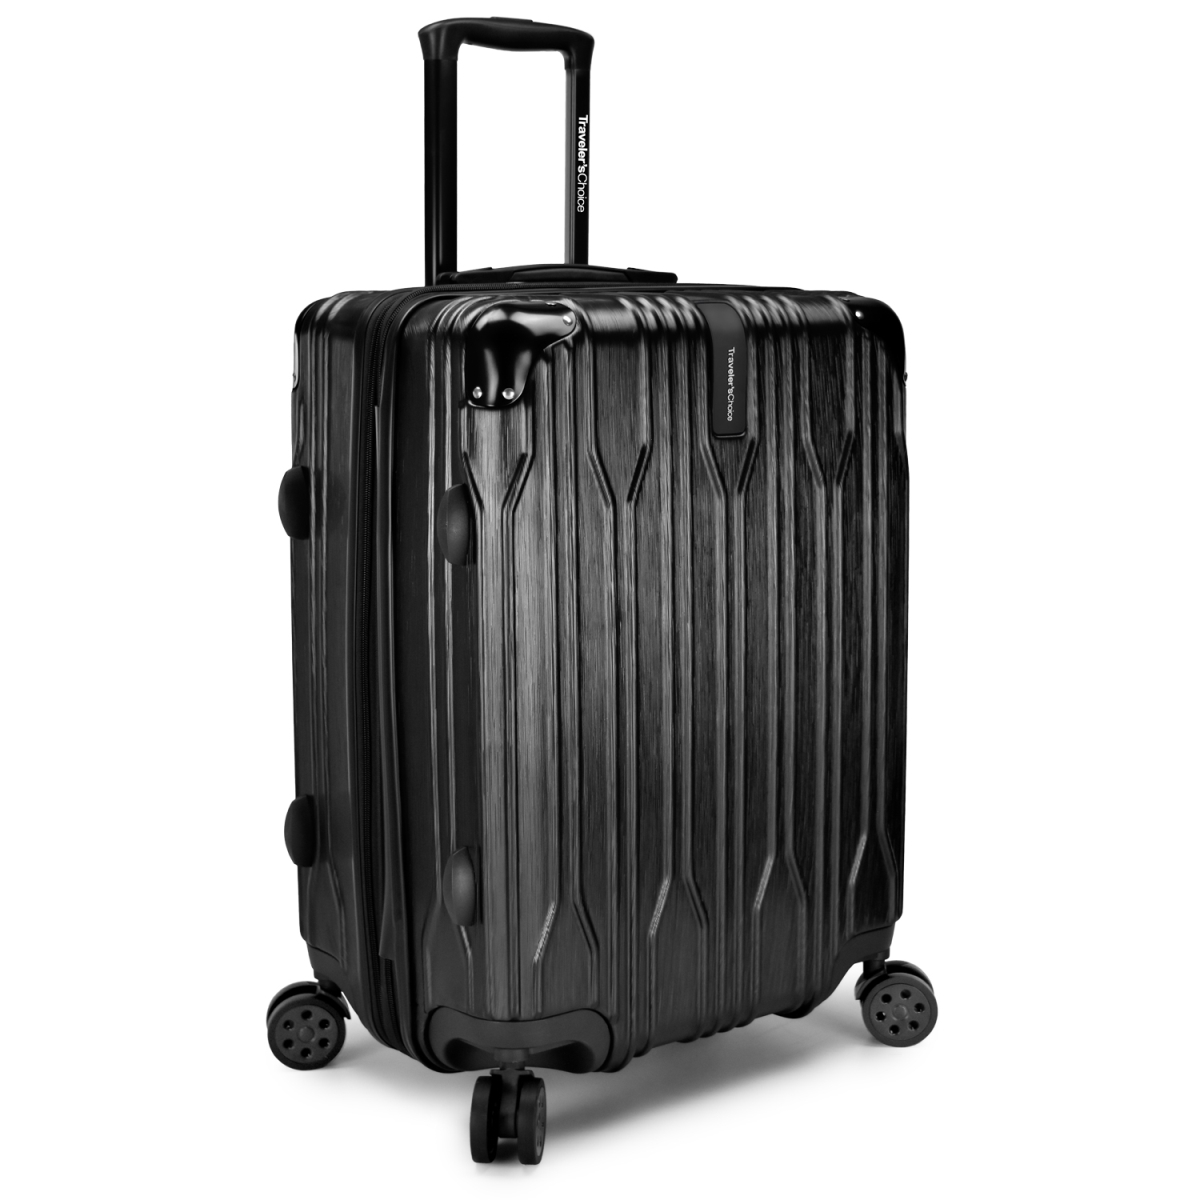 Travelers Choice Tc09035k24 Bell Weather Expandable 24 In. Spinner Luggage, Black